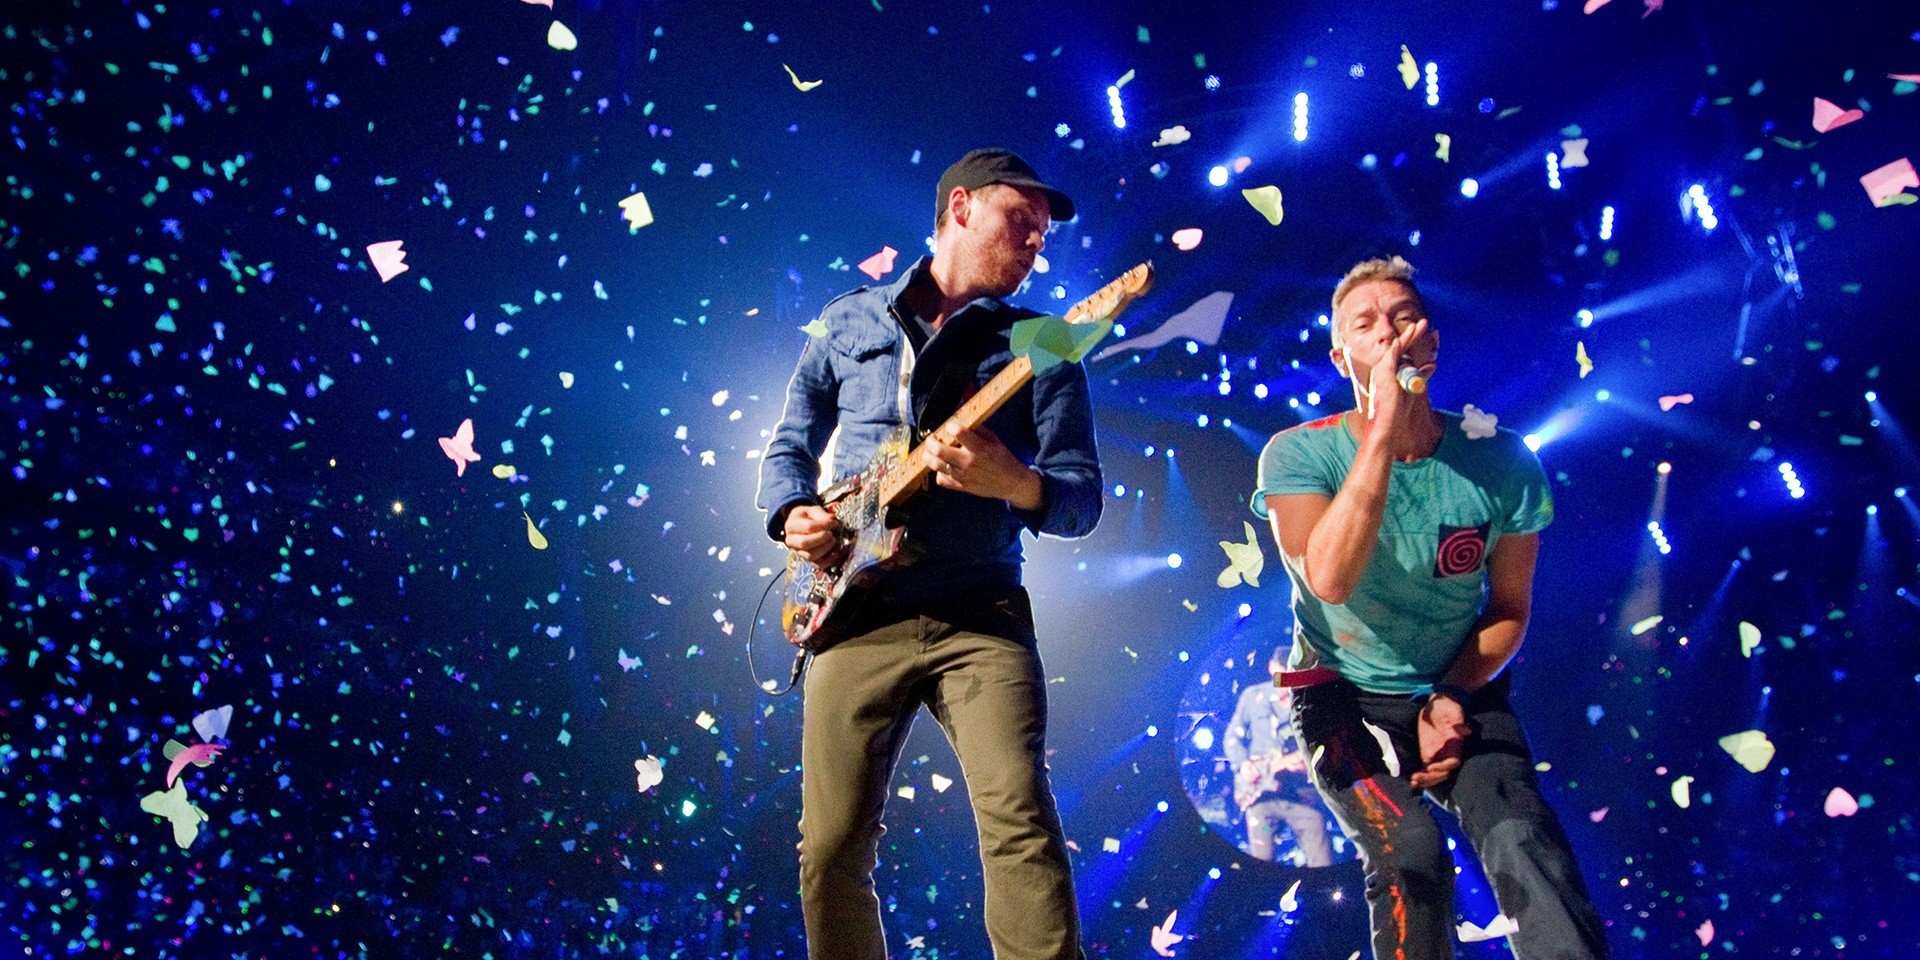 Two men were arrested for allegedly scamming Coldplay fans over Singapore shows